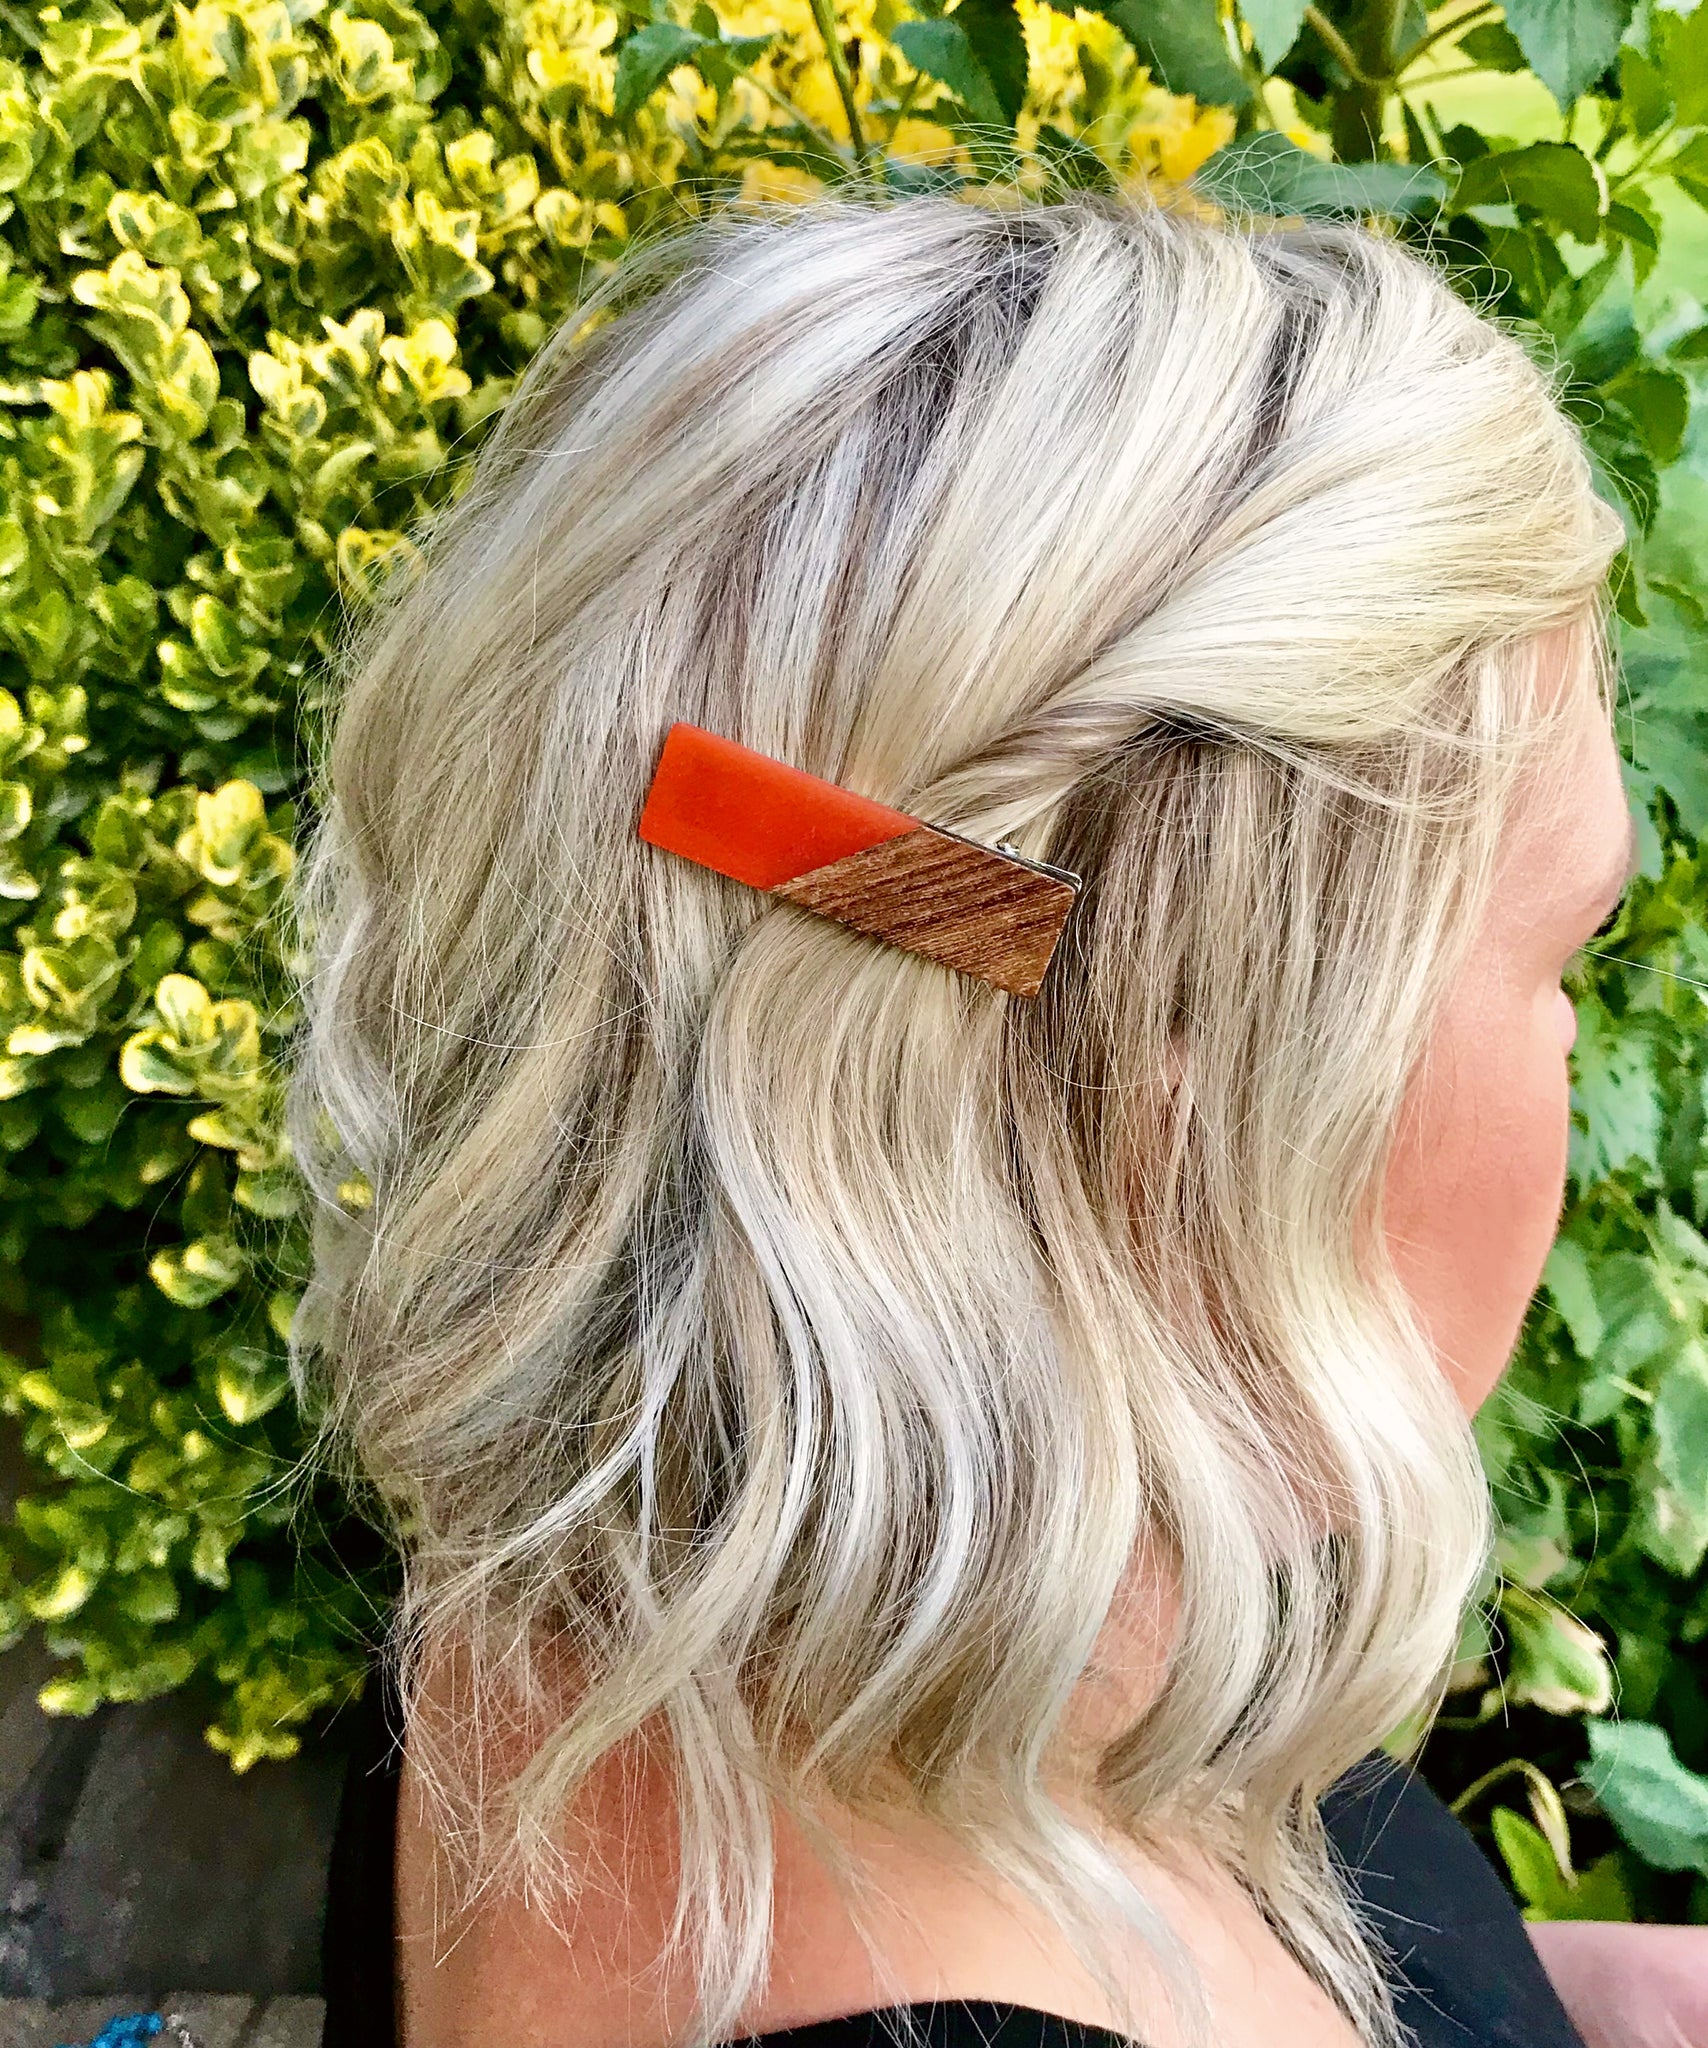 Never HAIR The End Of It Hair Clip (Black, Orange, Yellow)